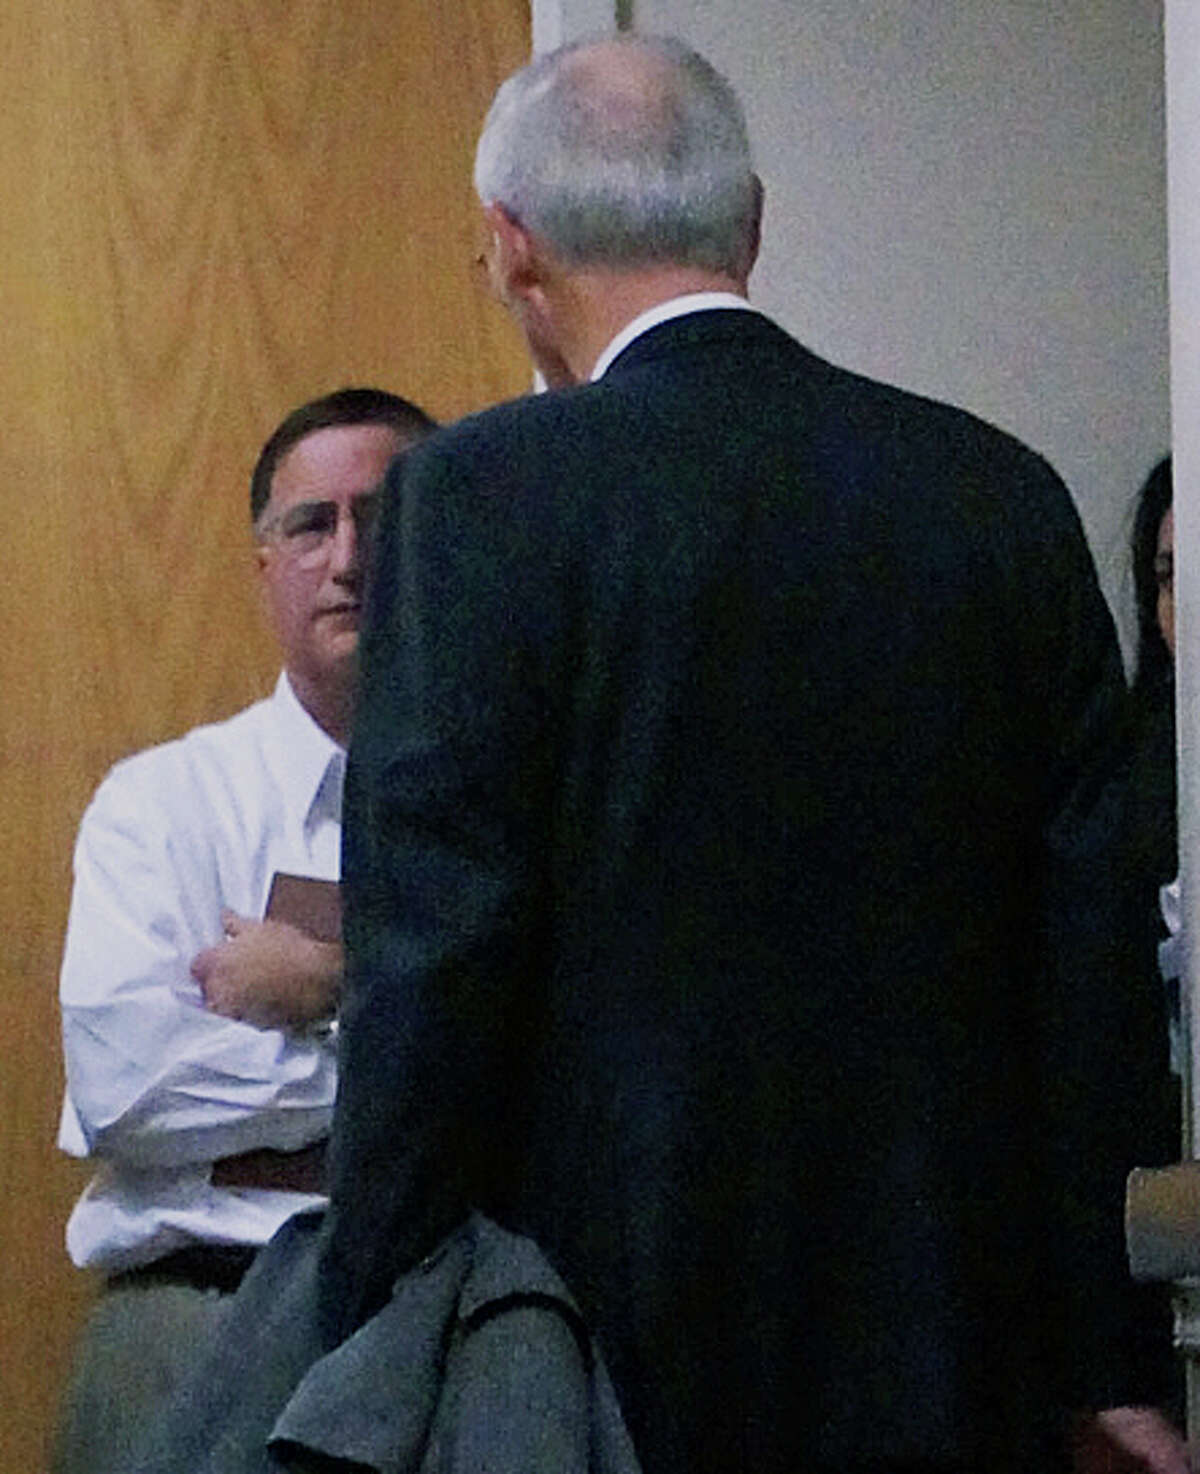 Supt. of Schools David Title, facing camera, huddles in the hallway with attorney Donald Houston after the Representative Town Meeting rejected a proposed contract with 38 school administrators.